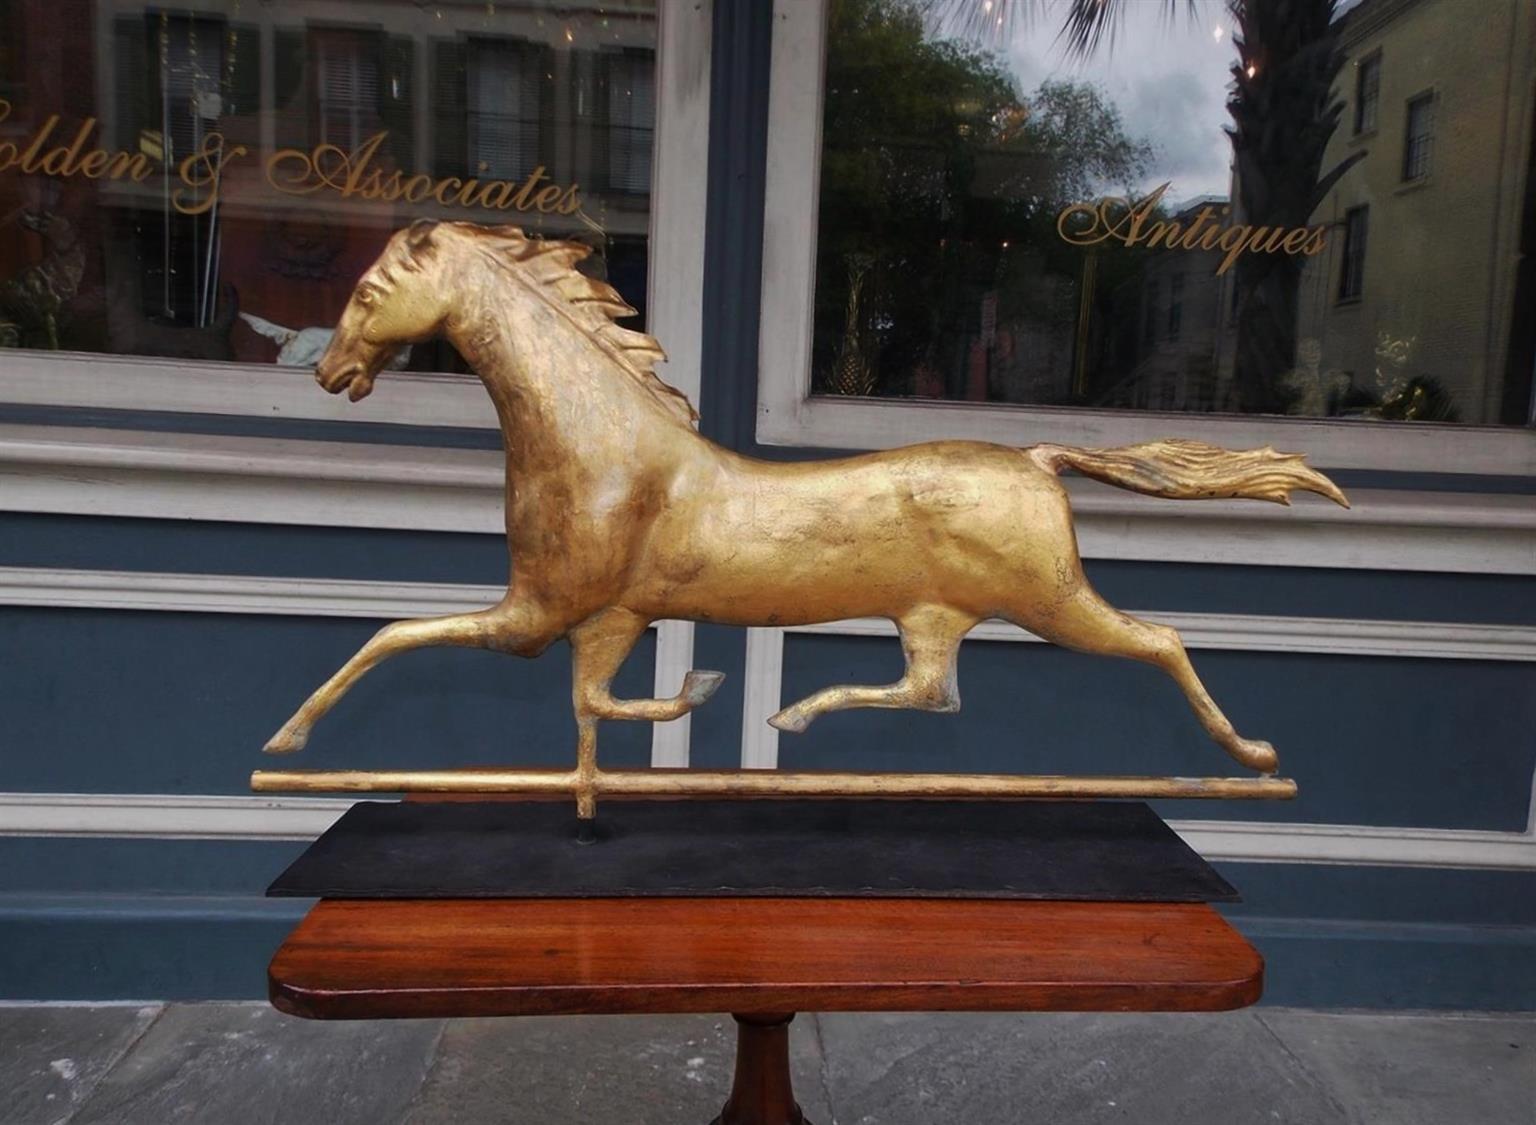 American gilt molded sheet copper full bodied running horse weathervane with the original Zinc head and mounted on a handmade iron bracket. Attributed to J.W. Fiske and Co. (ACTIVE 1870-1893), New York.
Measures: The bracket is 25.38 length / 6.63